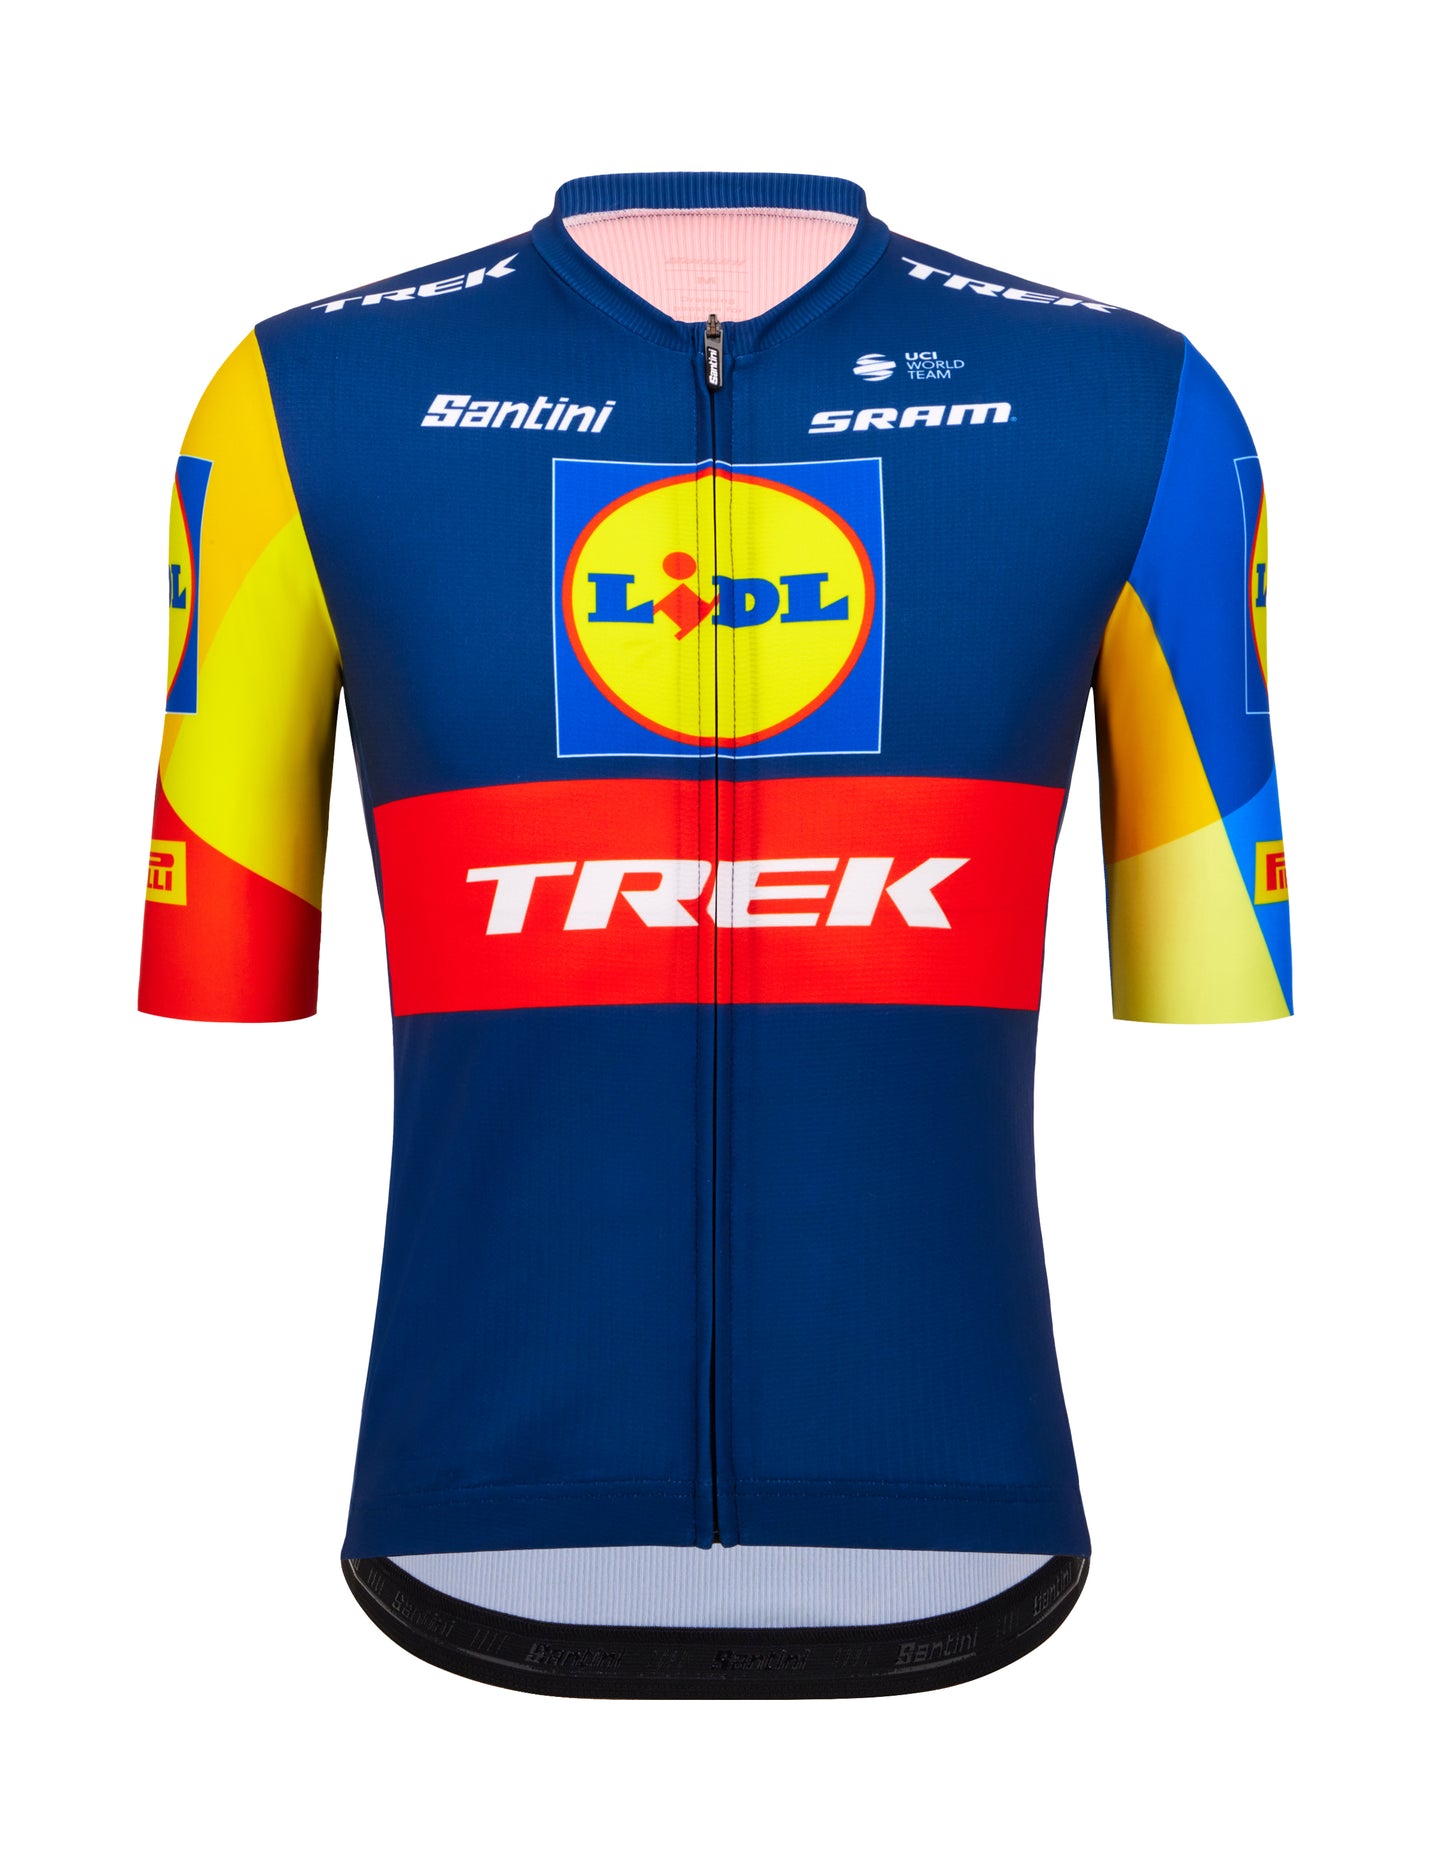 2024 LIDL TERKKING Cycling JERSEY Bibs Pants Suit Men Women Ropa Clclismo  Team Winter Pro Thermal Fleece BICYCLE JACKET Maillot Clothing